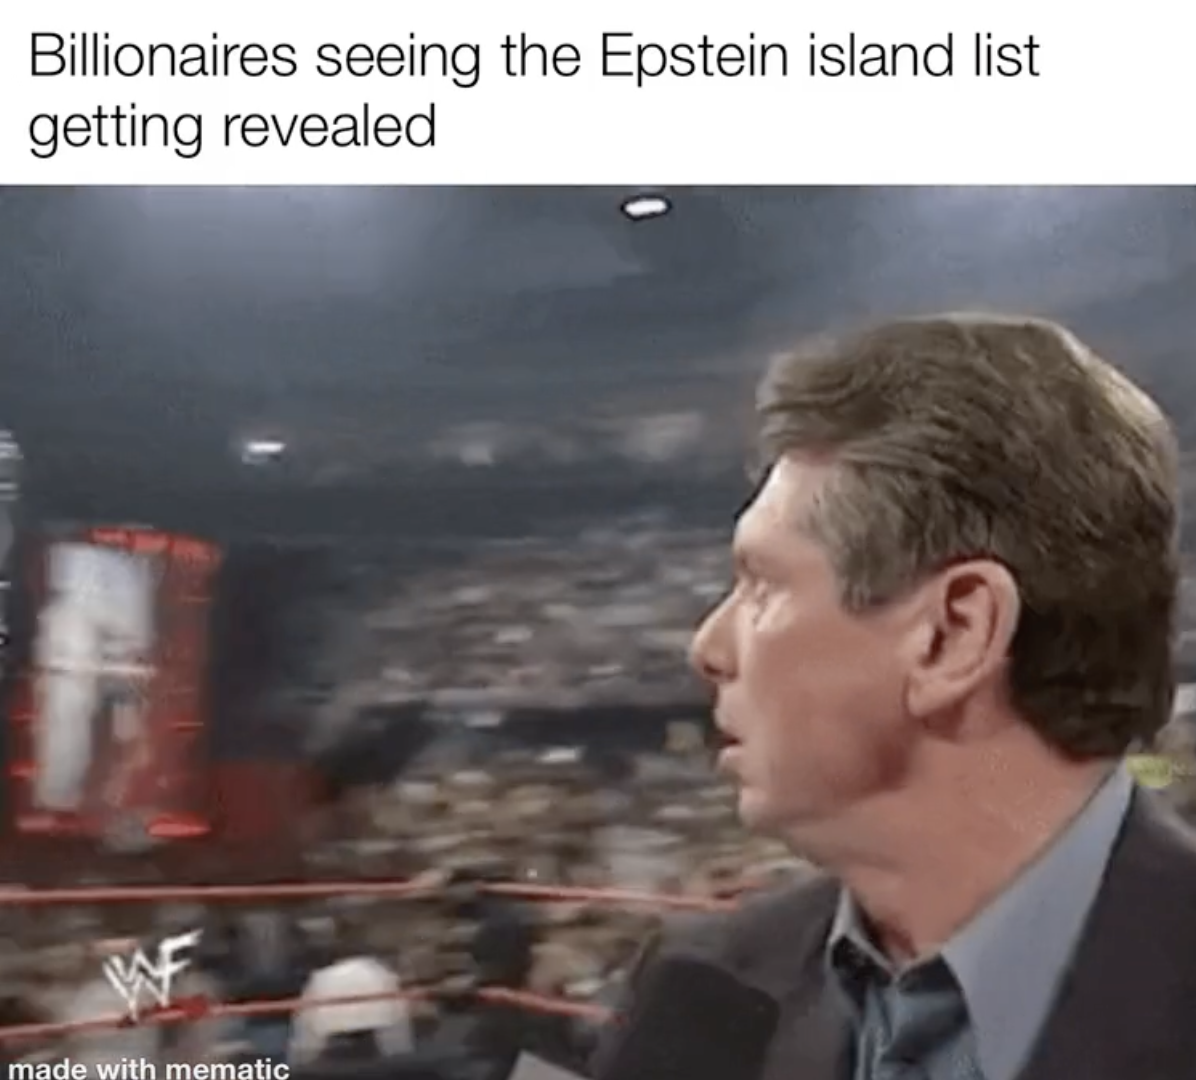 photo caption - Billionaires seeing the Epstein island list getting revealed made with mematic